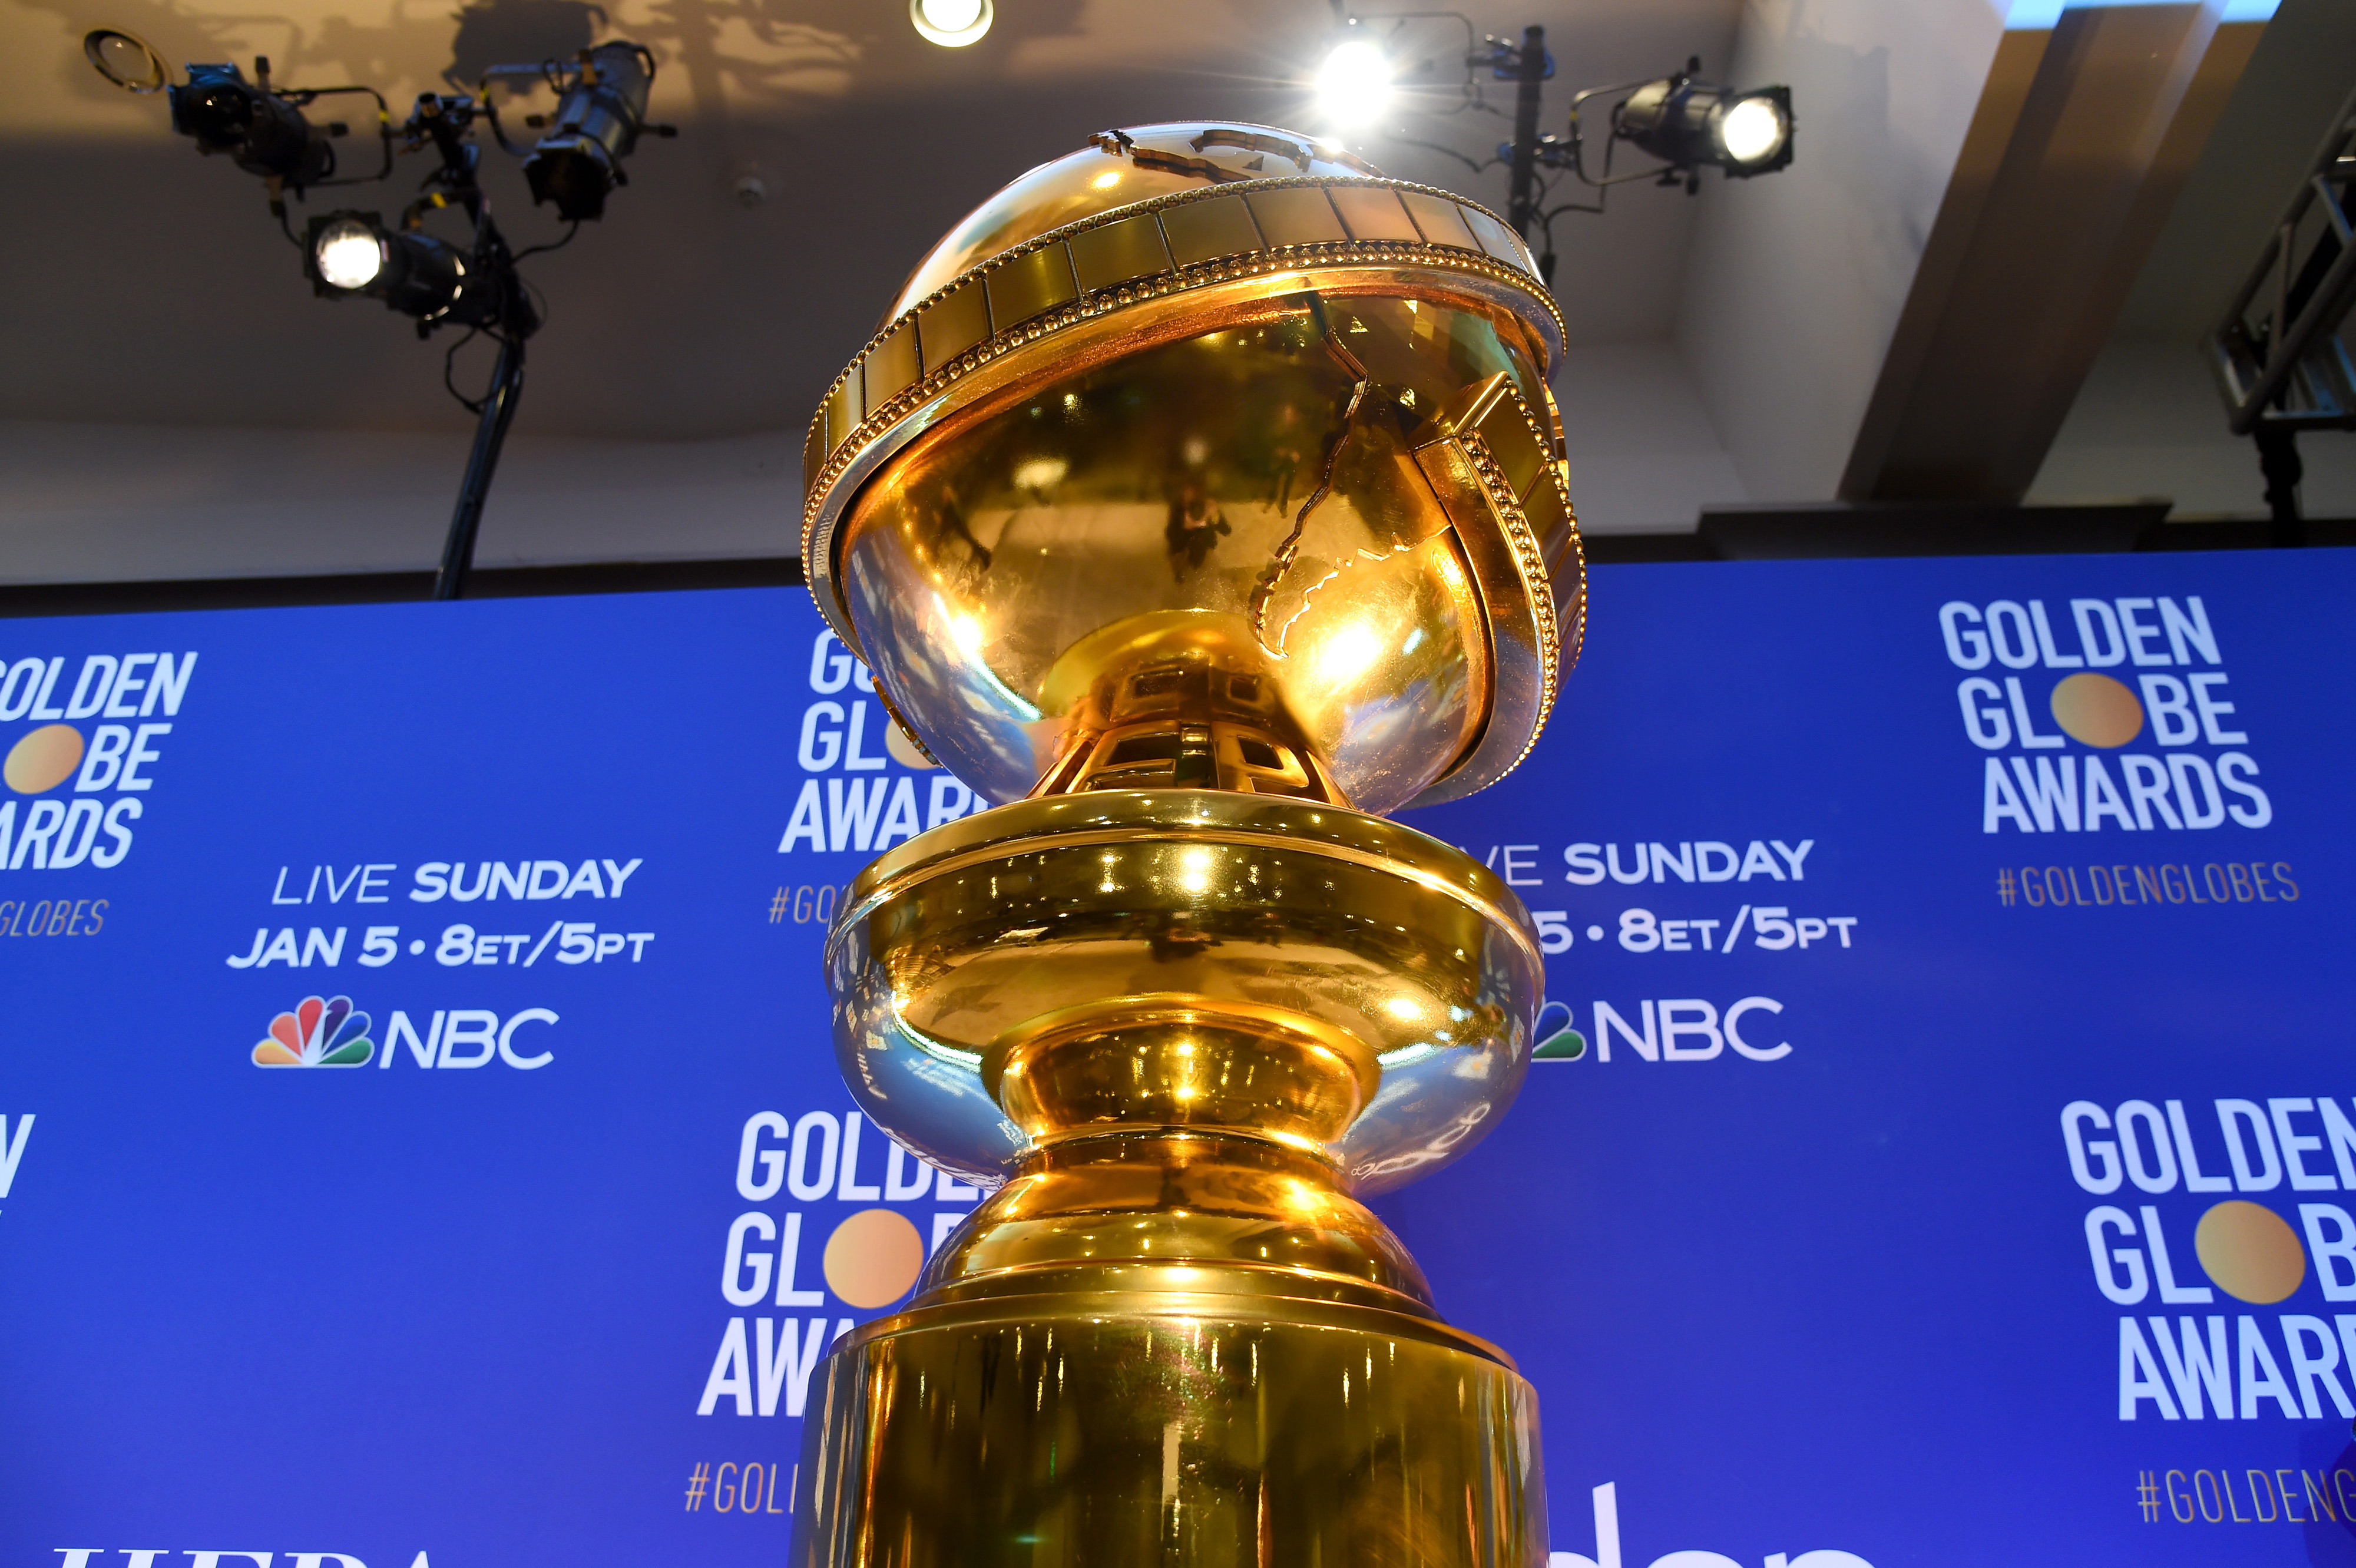 A Golden Globe statue in front of a backdrop that reads, “Golden Globe Awards.”